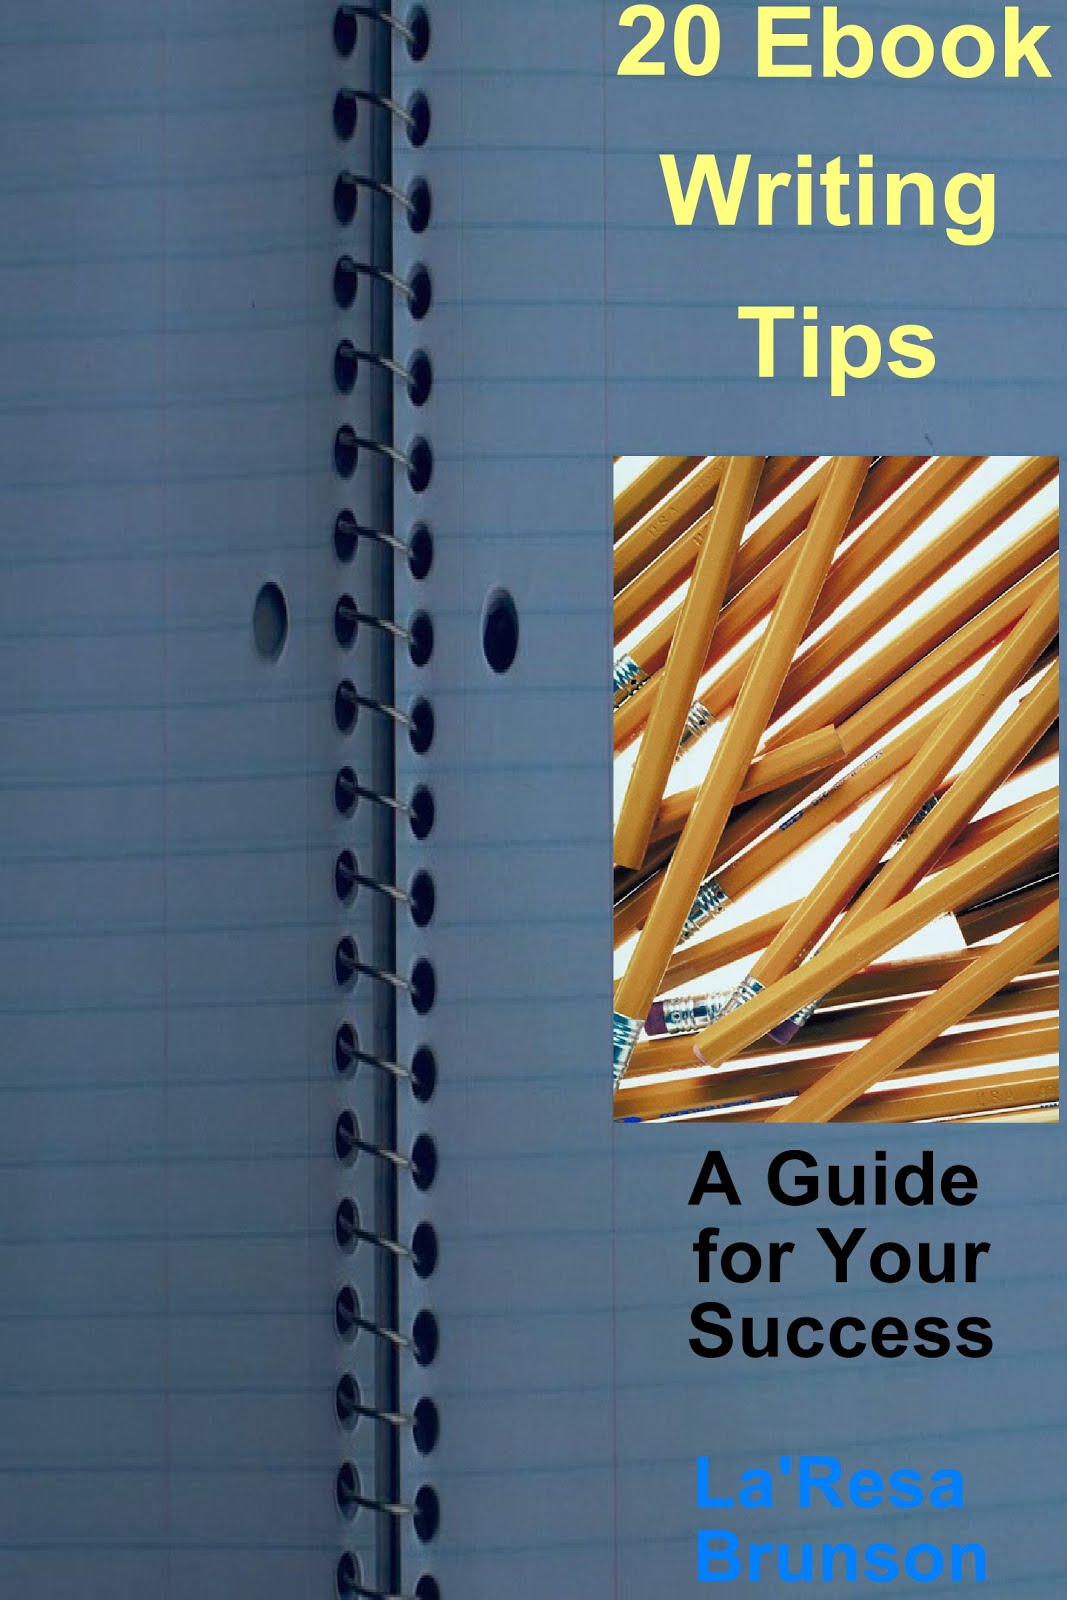 20 Ebook Writing Tips: A Guide for Your Success